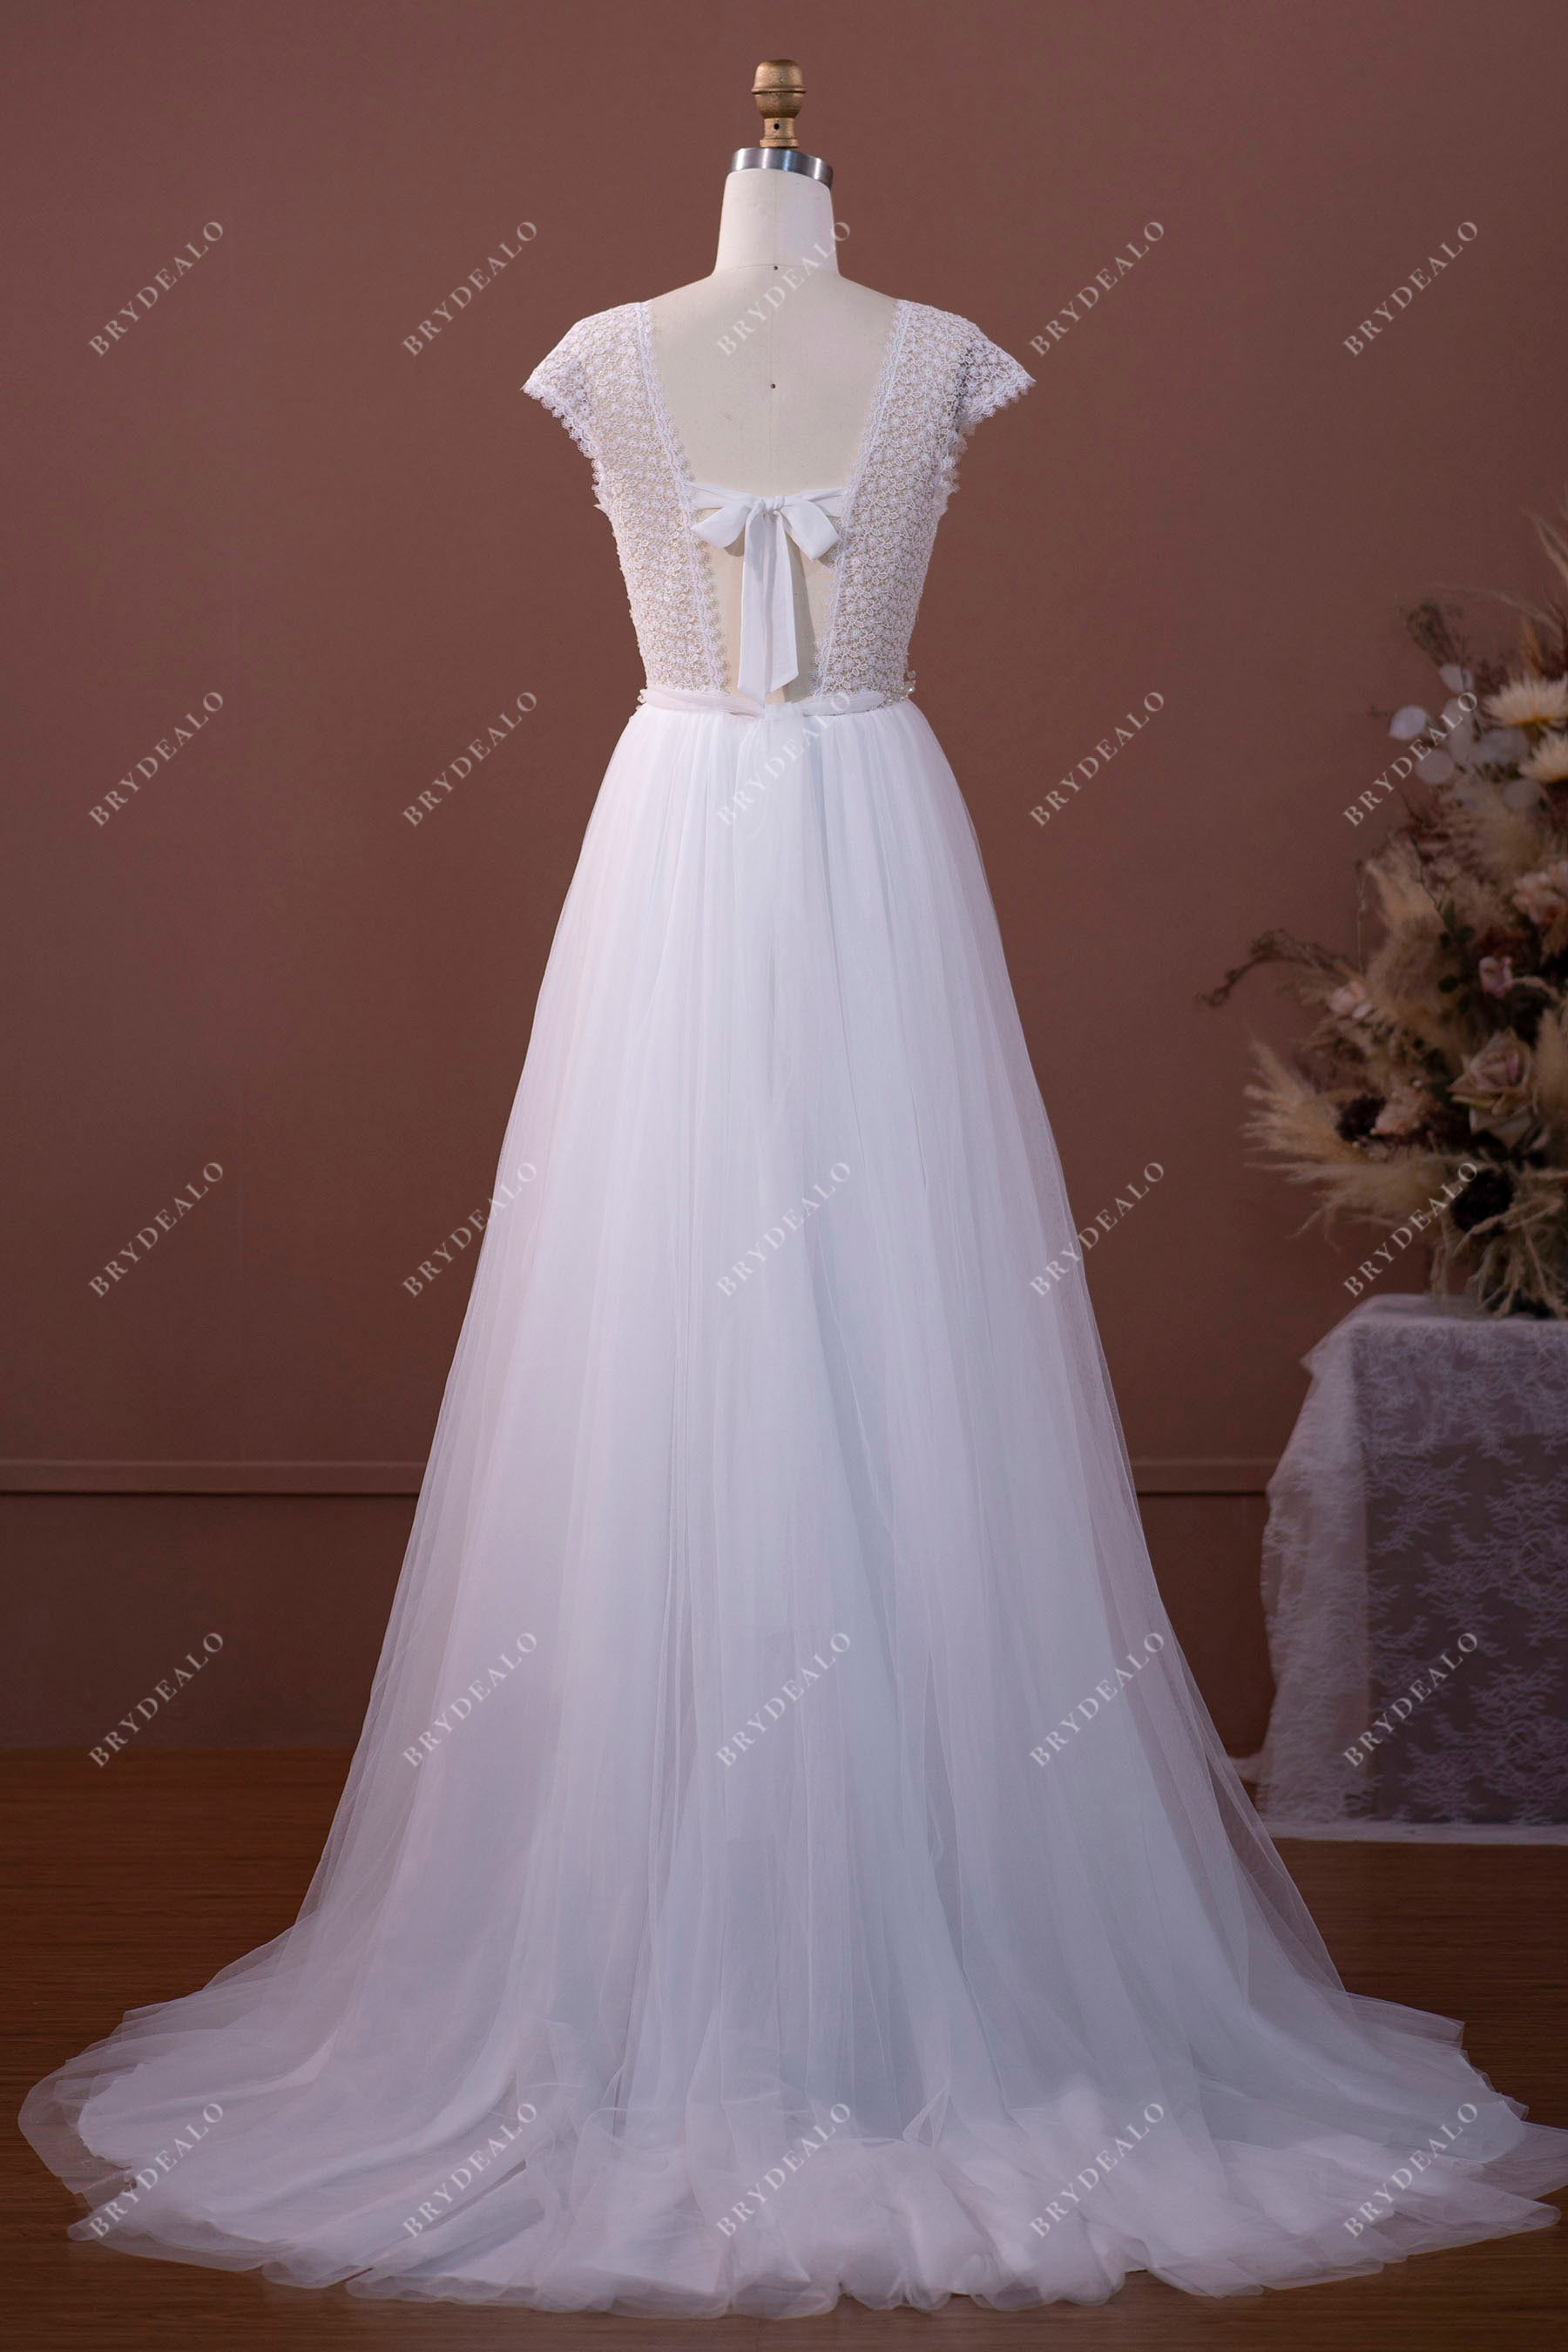 Cap Sleeve Illusion Floral Lace Tulle Bridal Gown